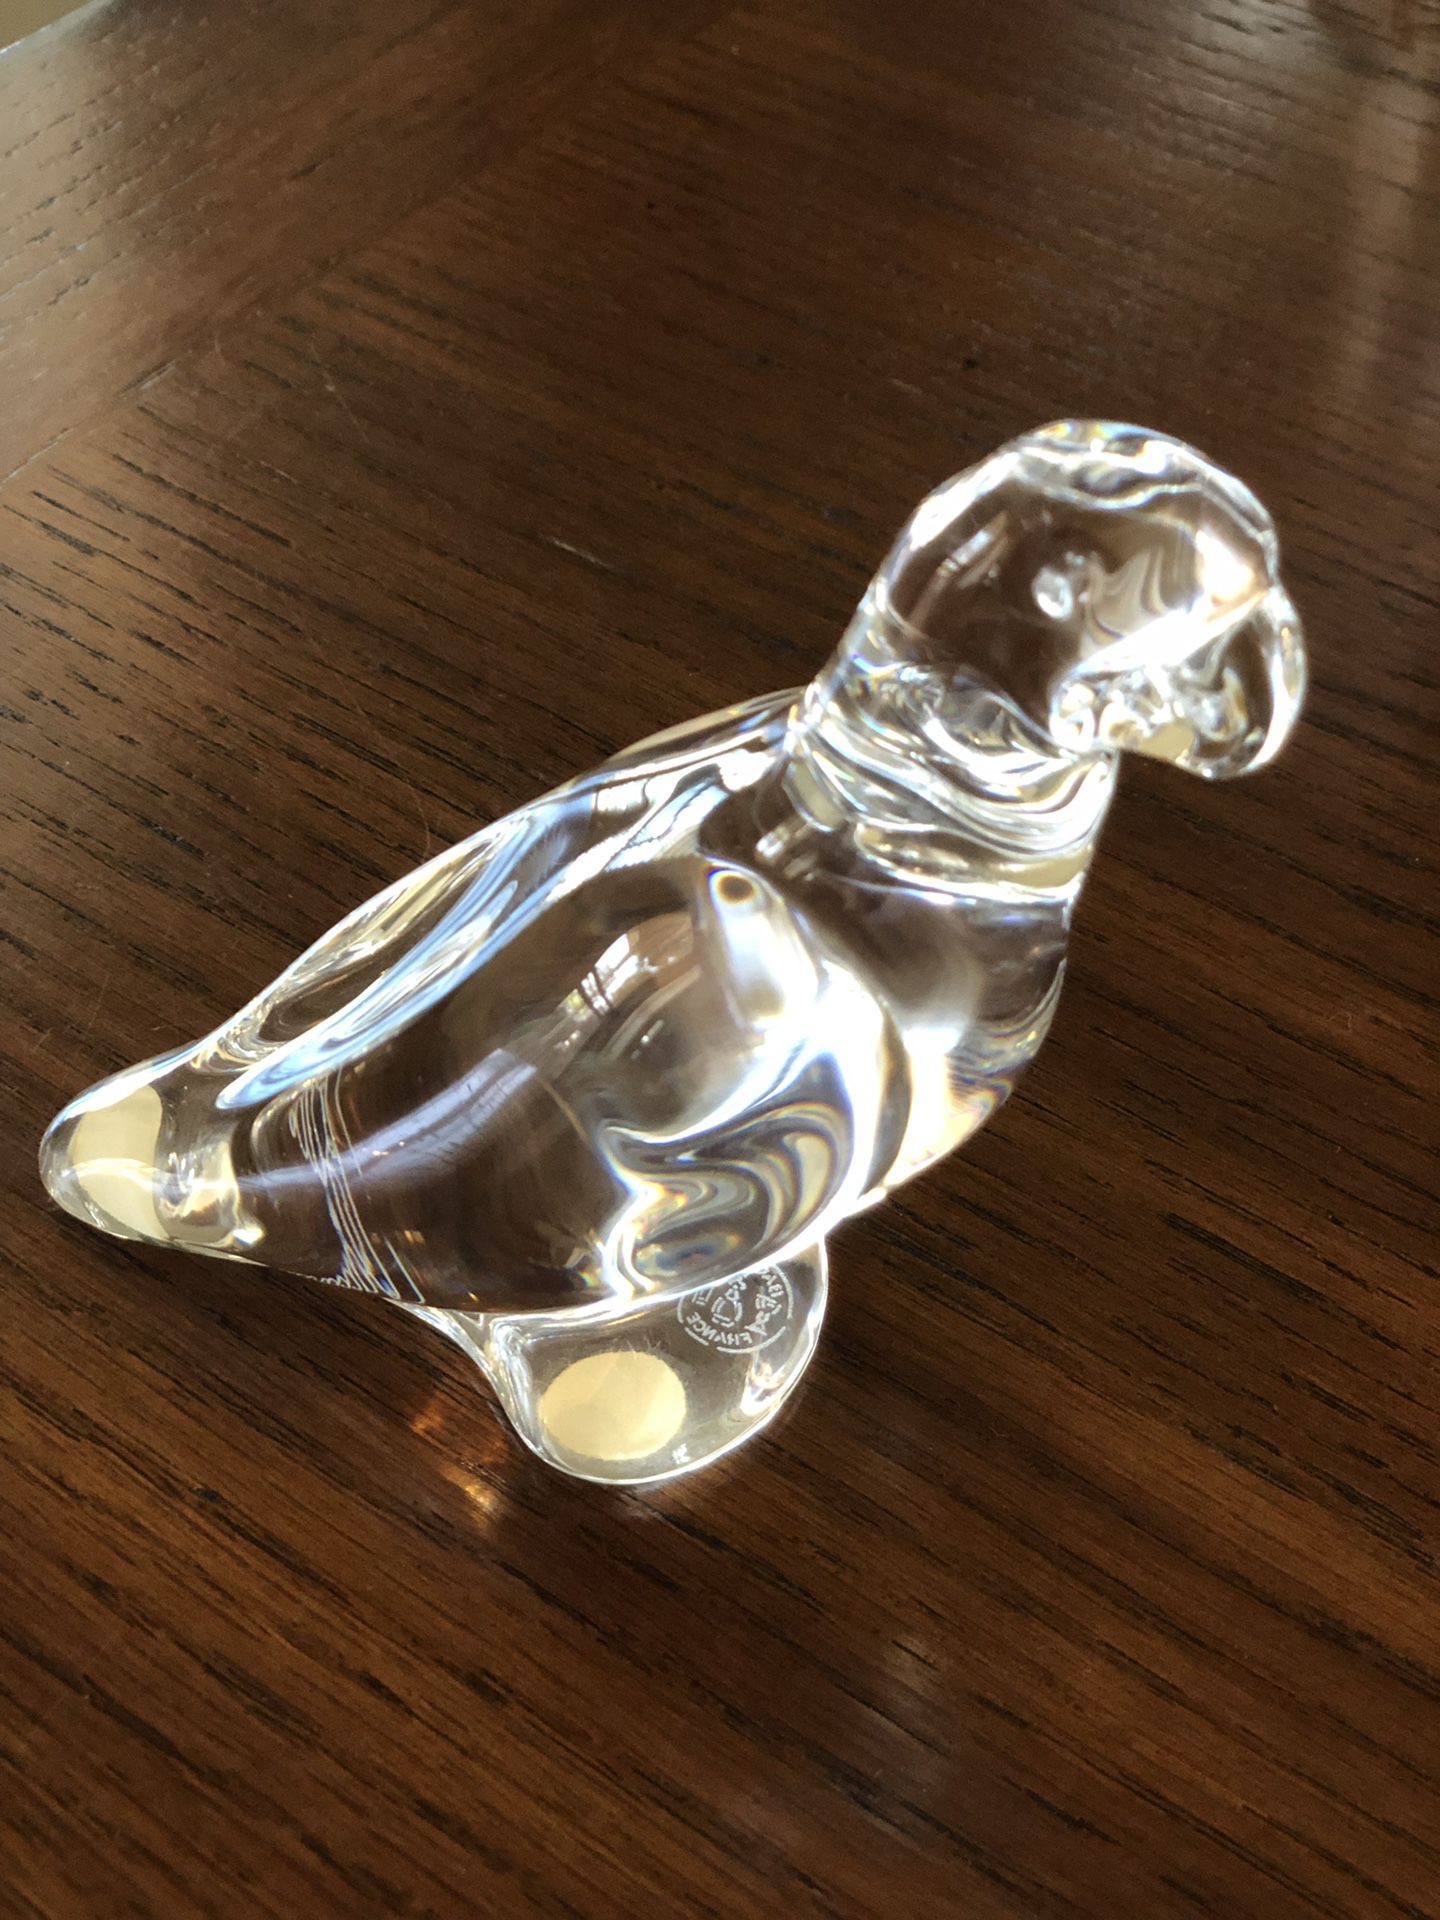 Flawless Baccarat Crystal Parrot clear bird figurine (4" tall), stamped + signed) Great Elegant Paperweight for the Office